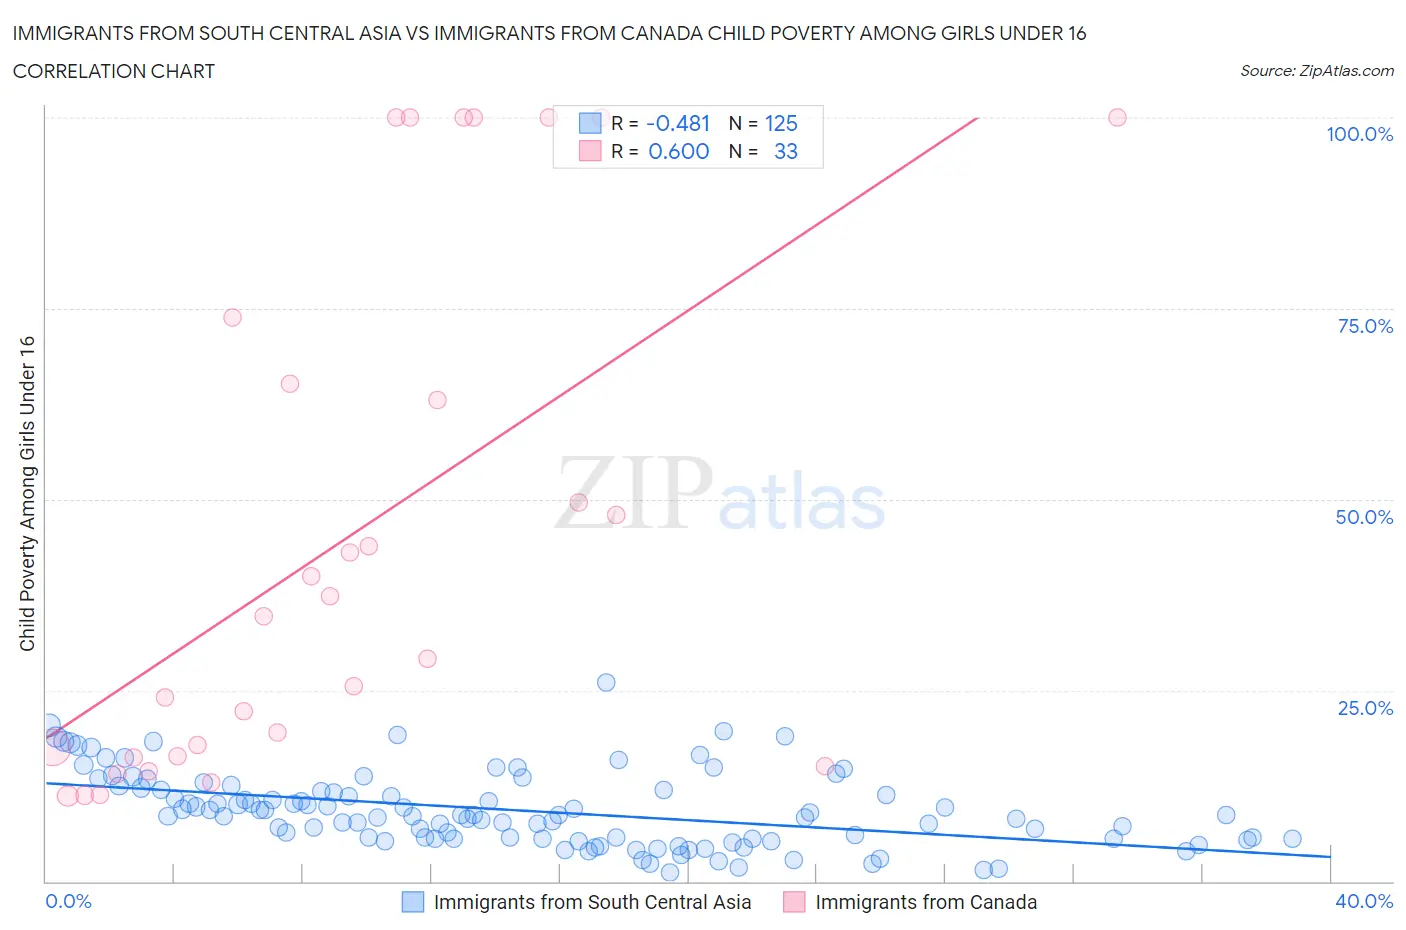 Immigrants from South Central Asia vs Immigrants from Canada Child Poverty Among Girls Under 16